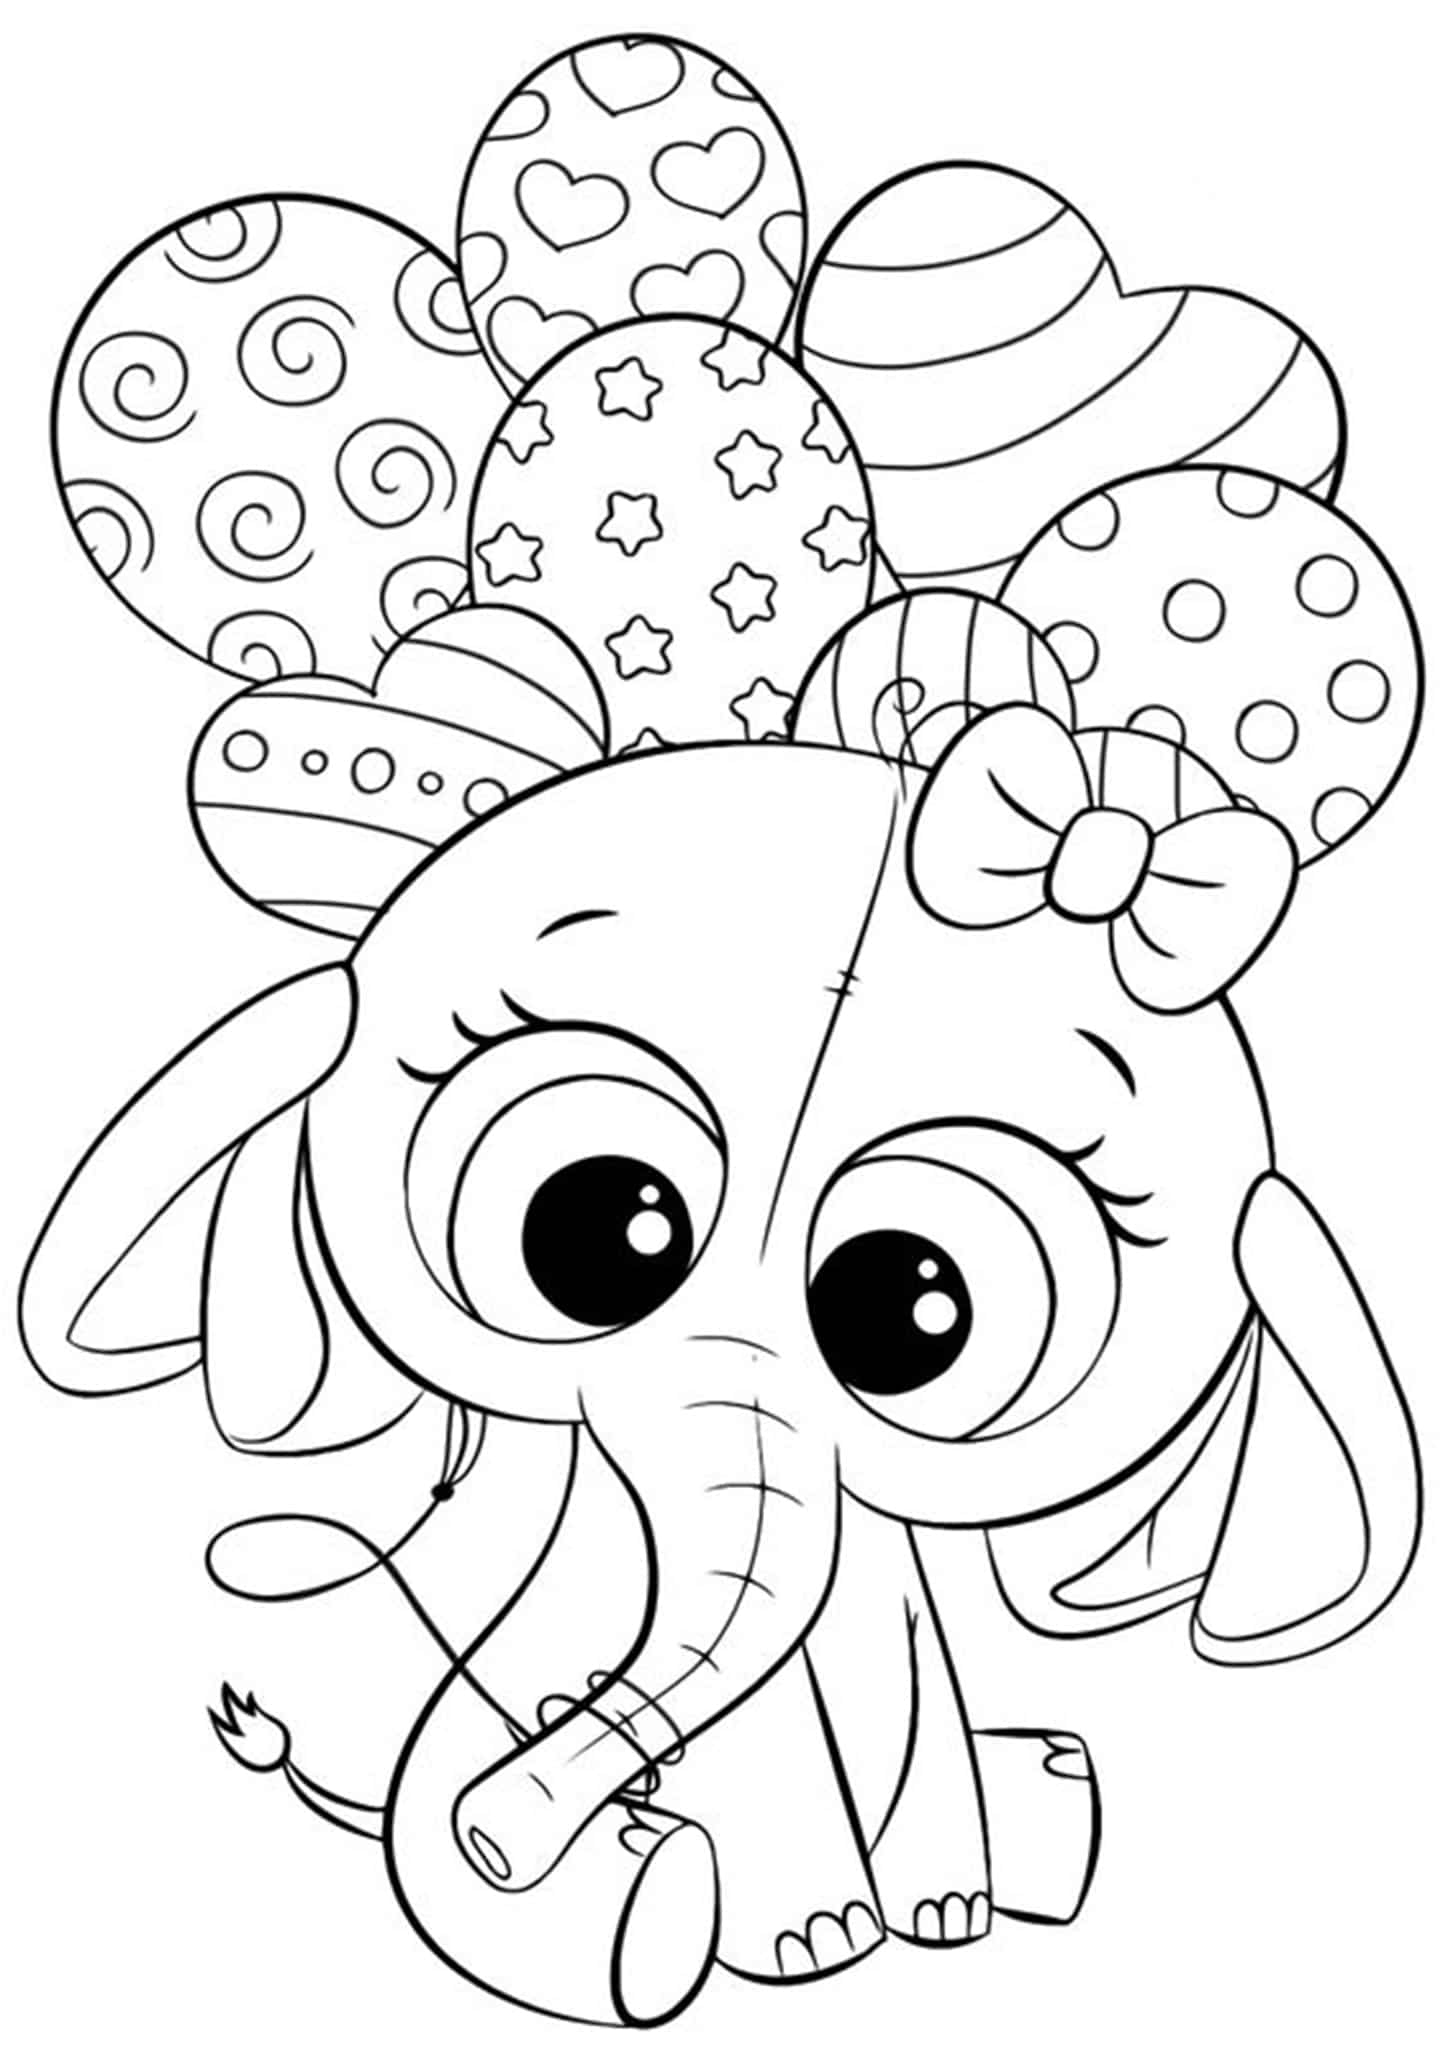 free-printable-elephant-coloring-pages-for-kids-elephant-coloring-page